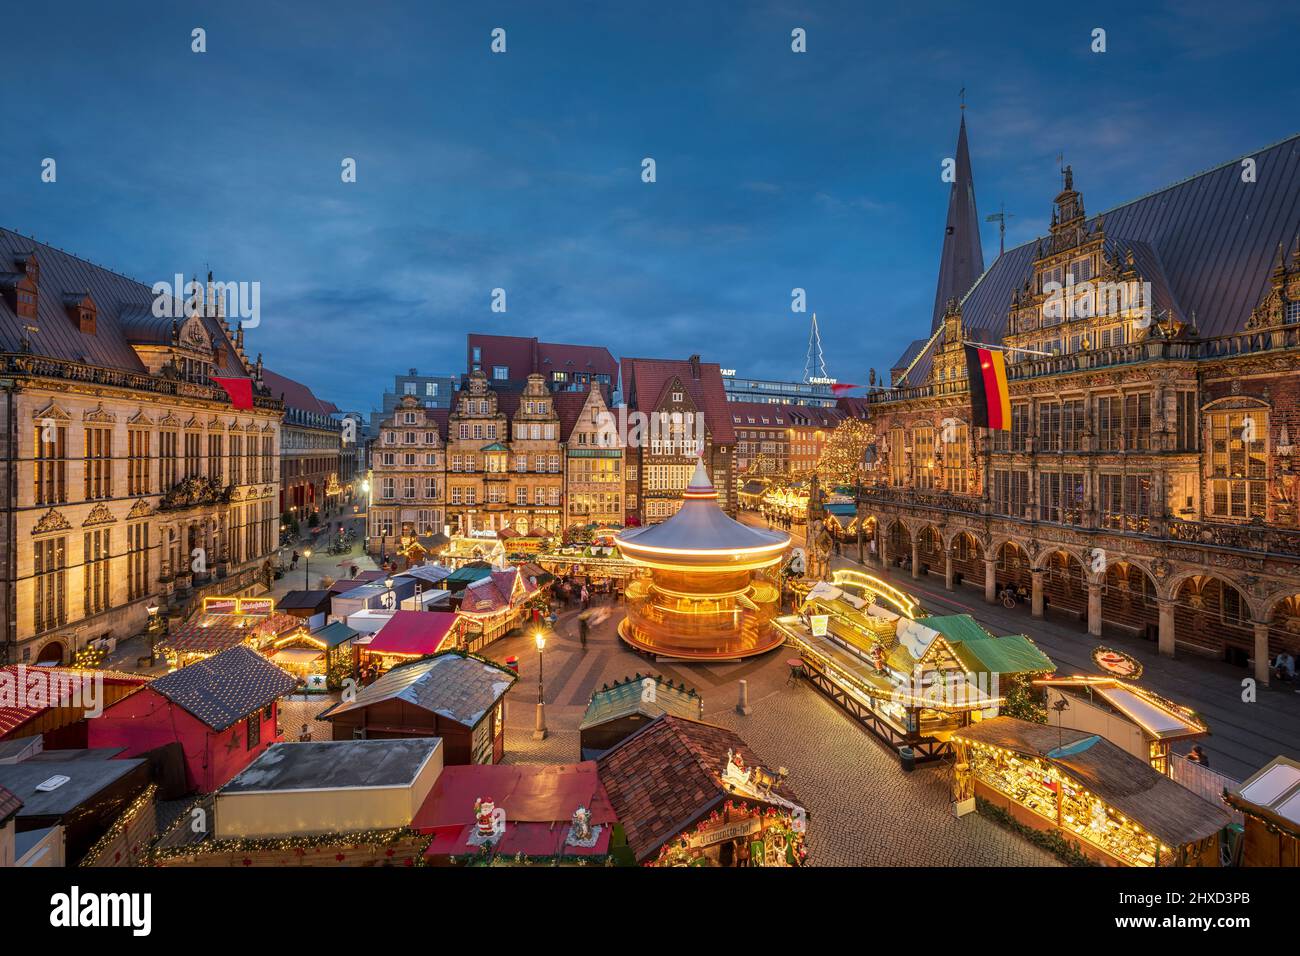 Christmas market in Bremen, Germany at night Stock Photo